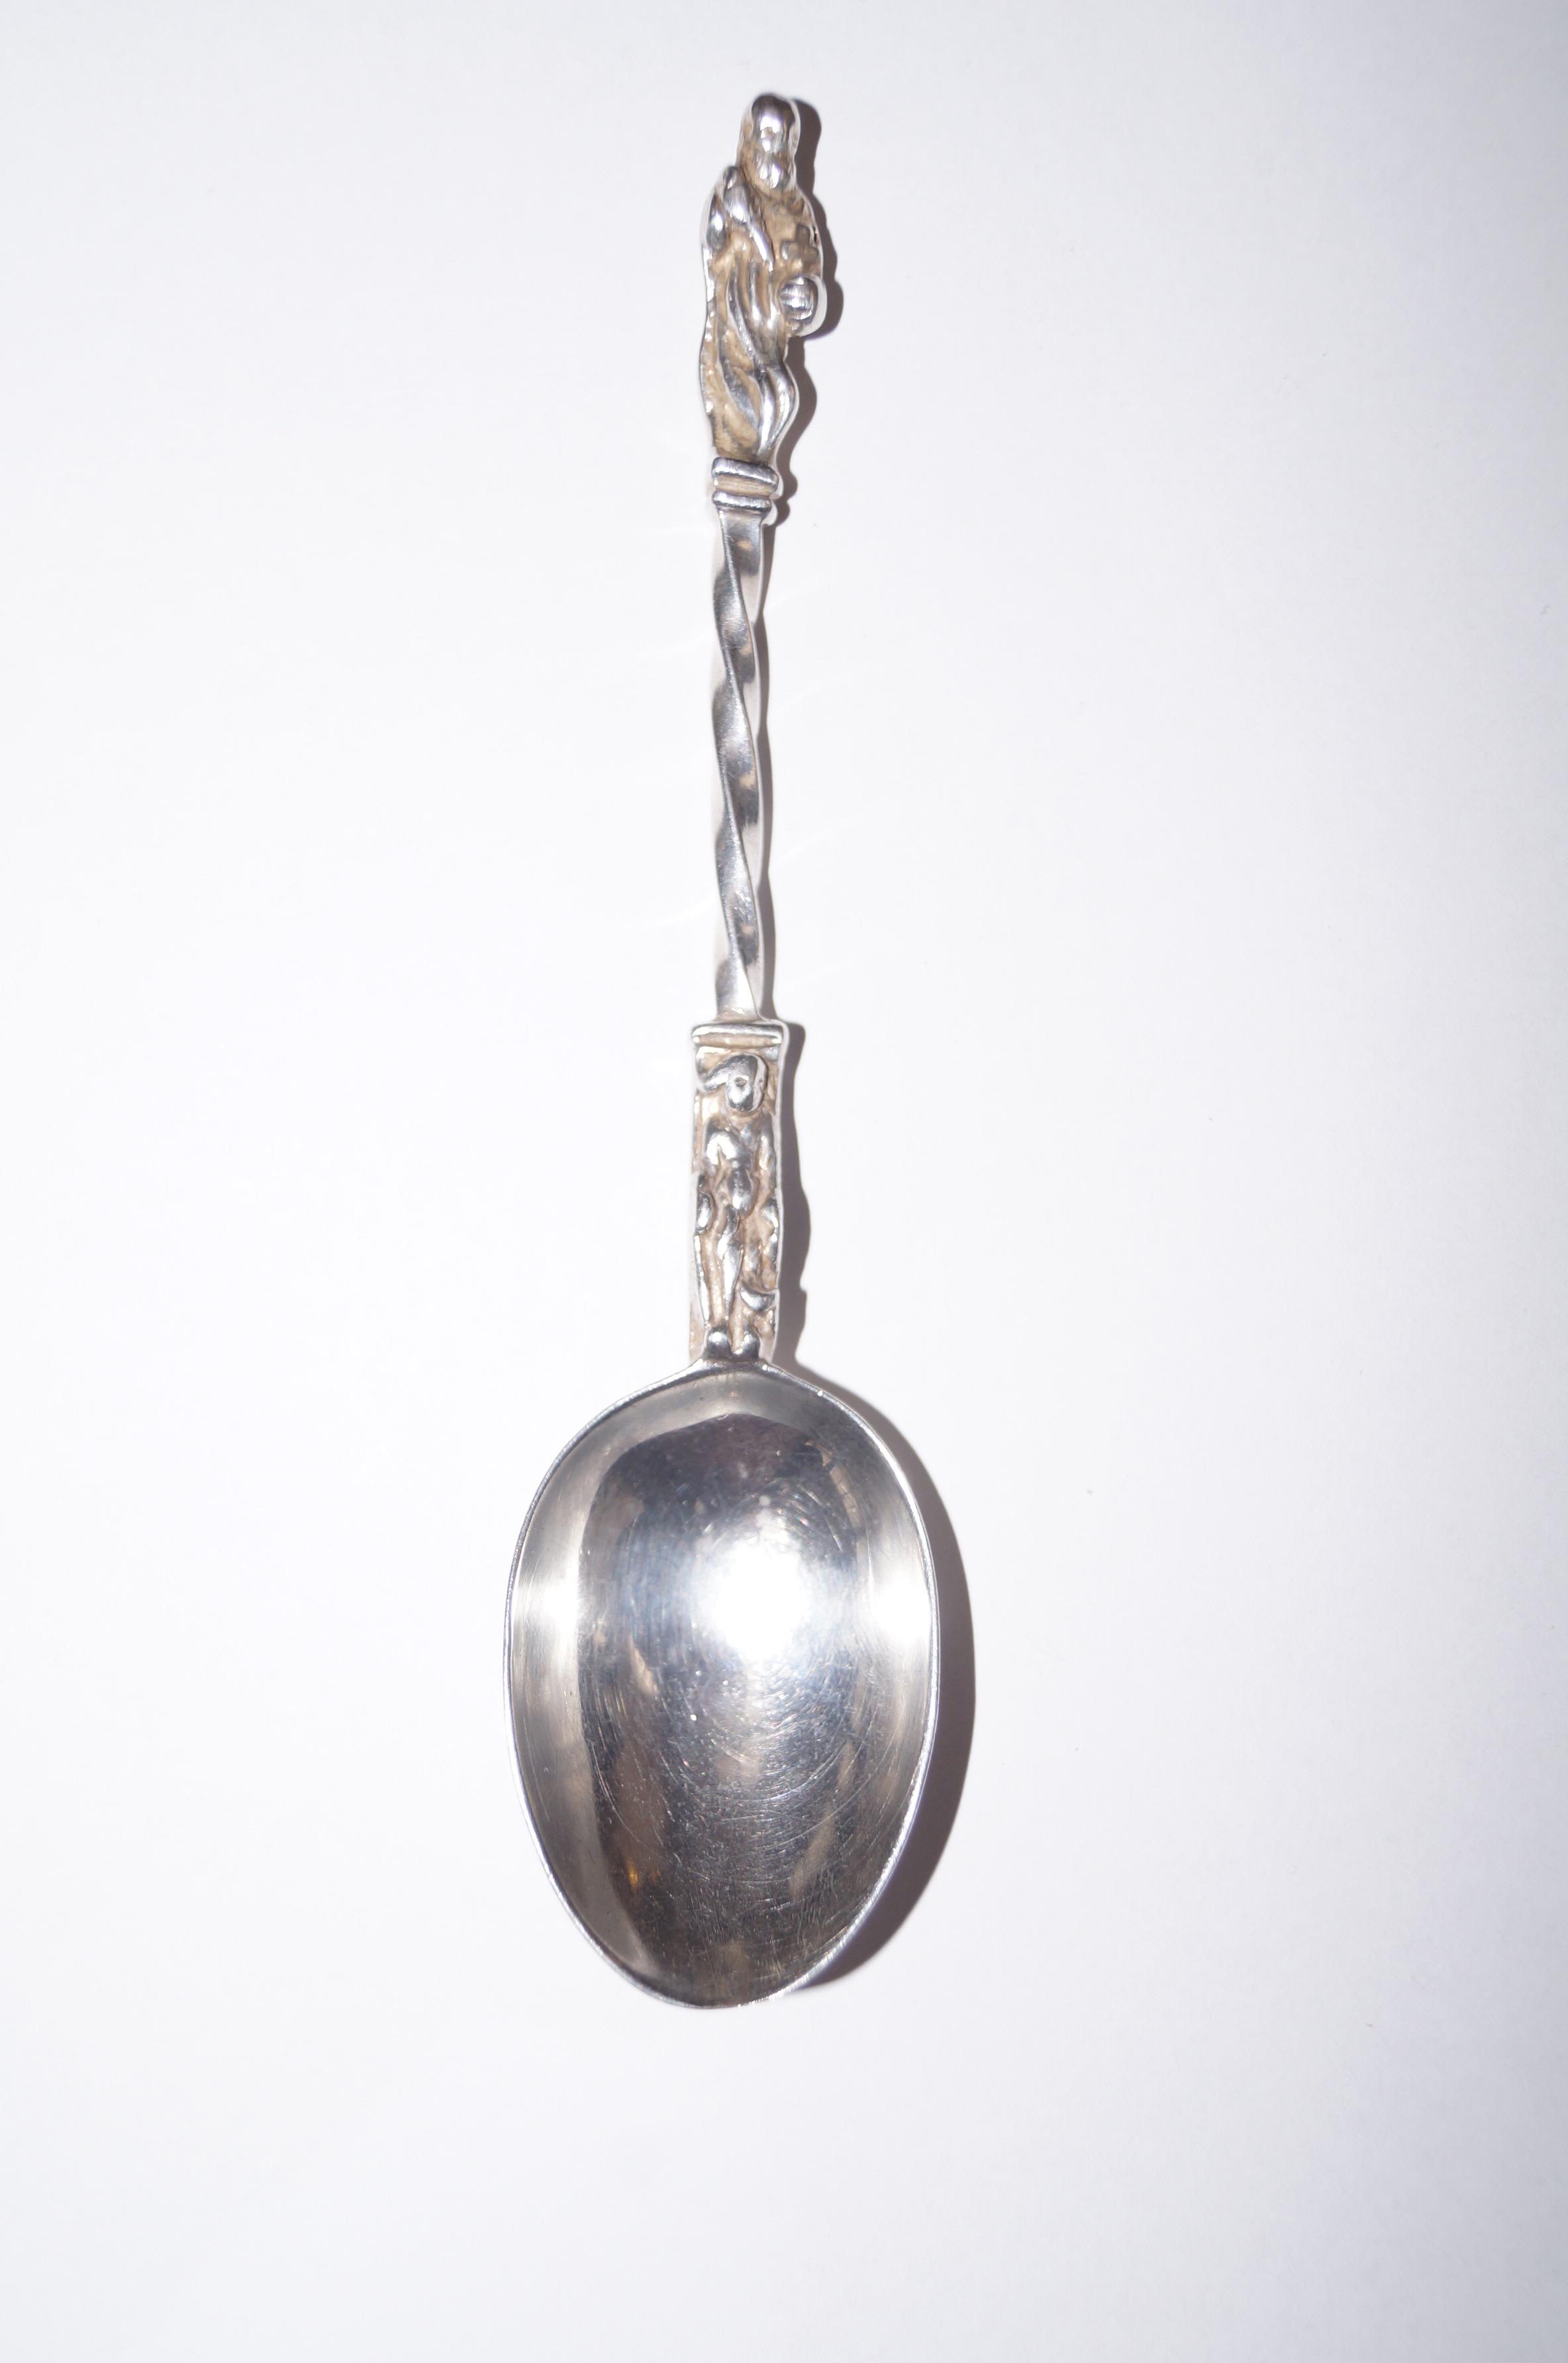 A silver hallmarked spoon with a religious figure